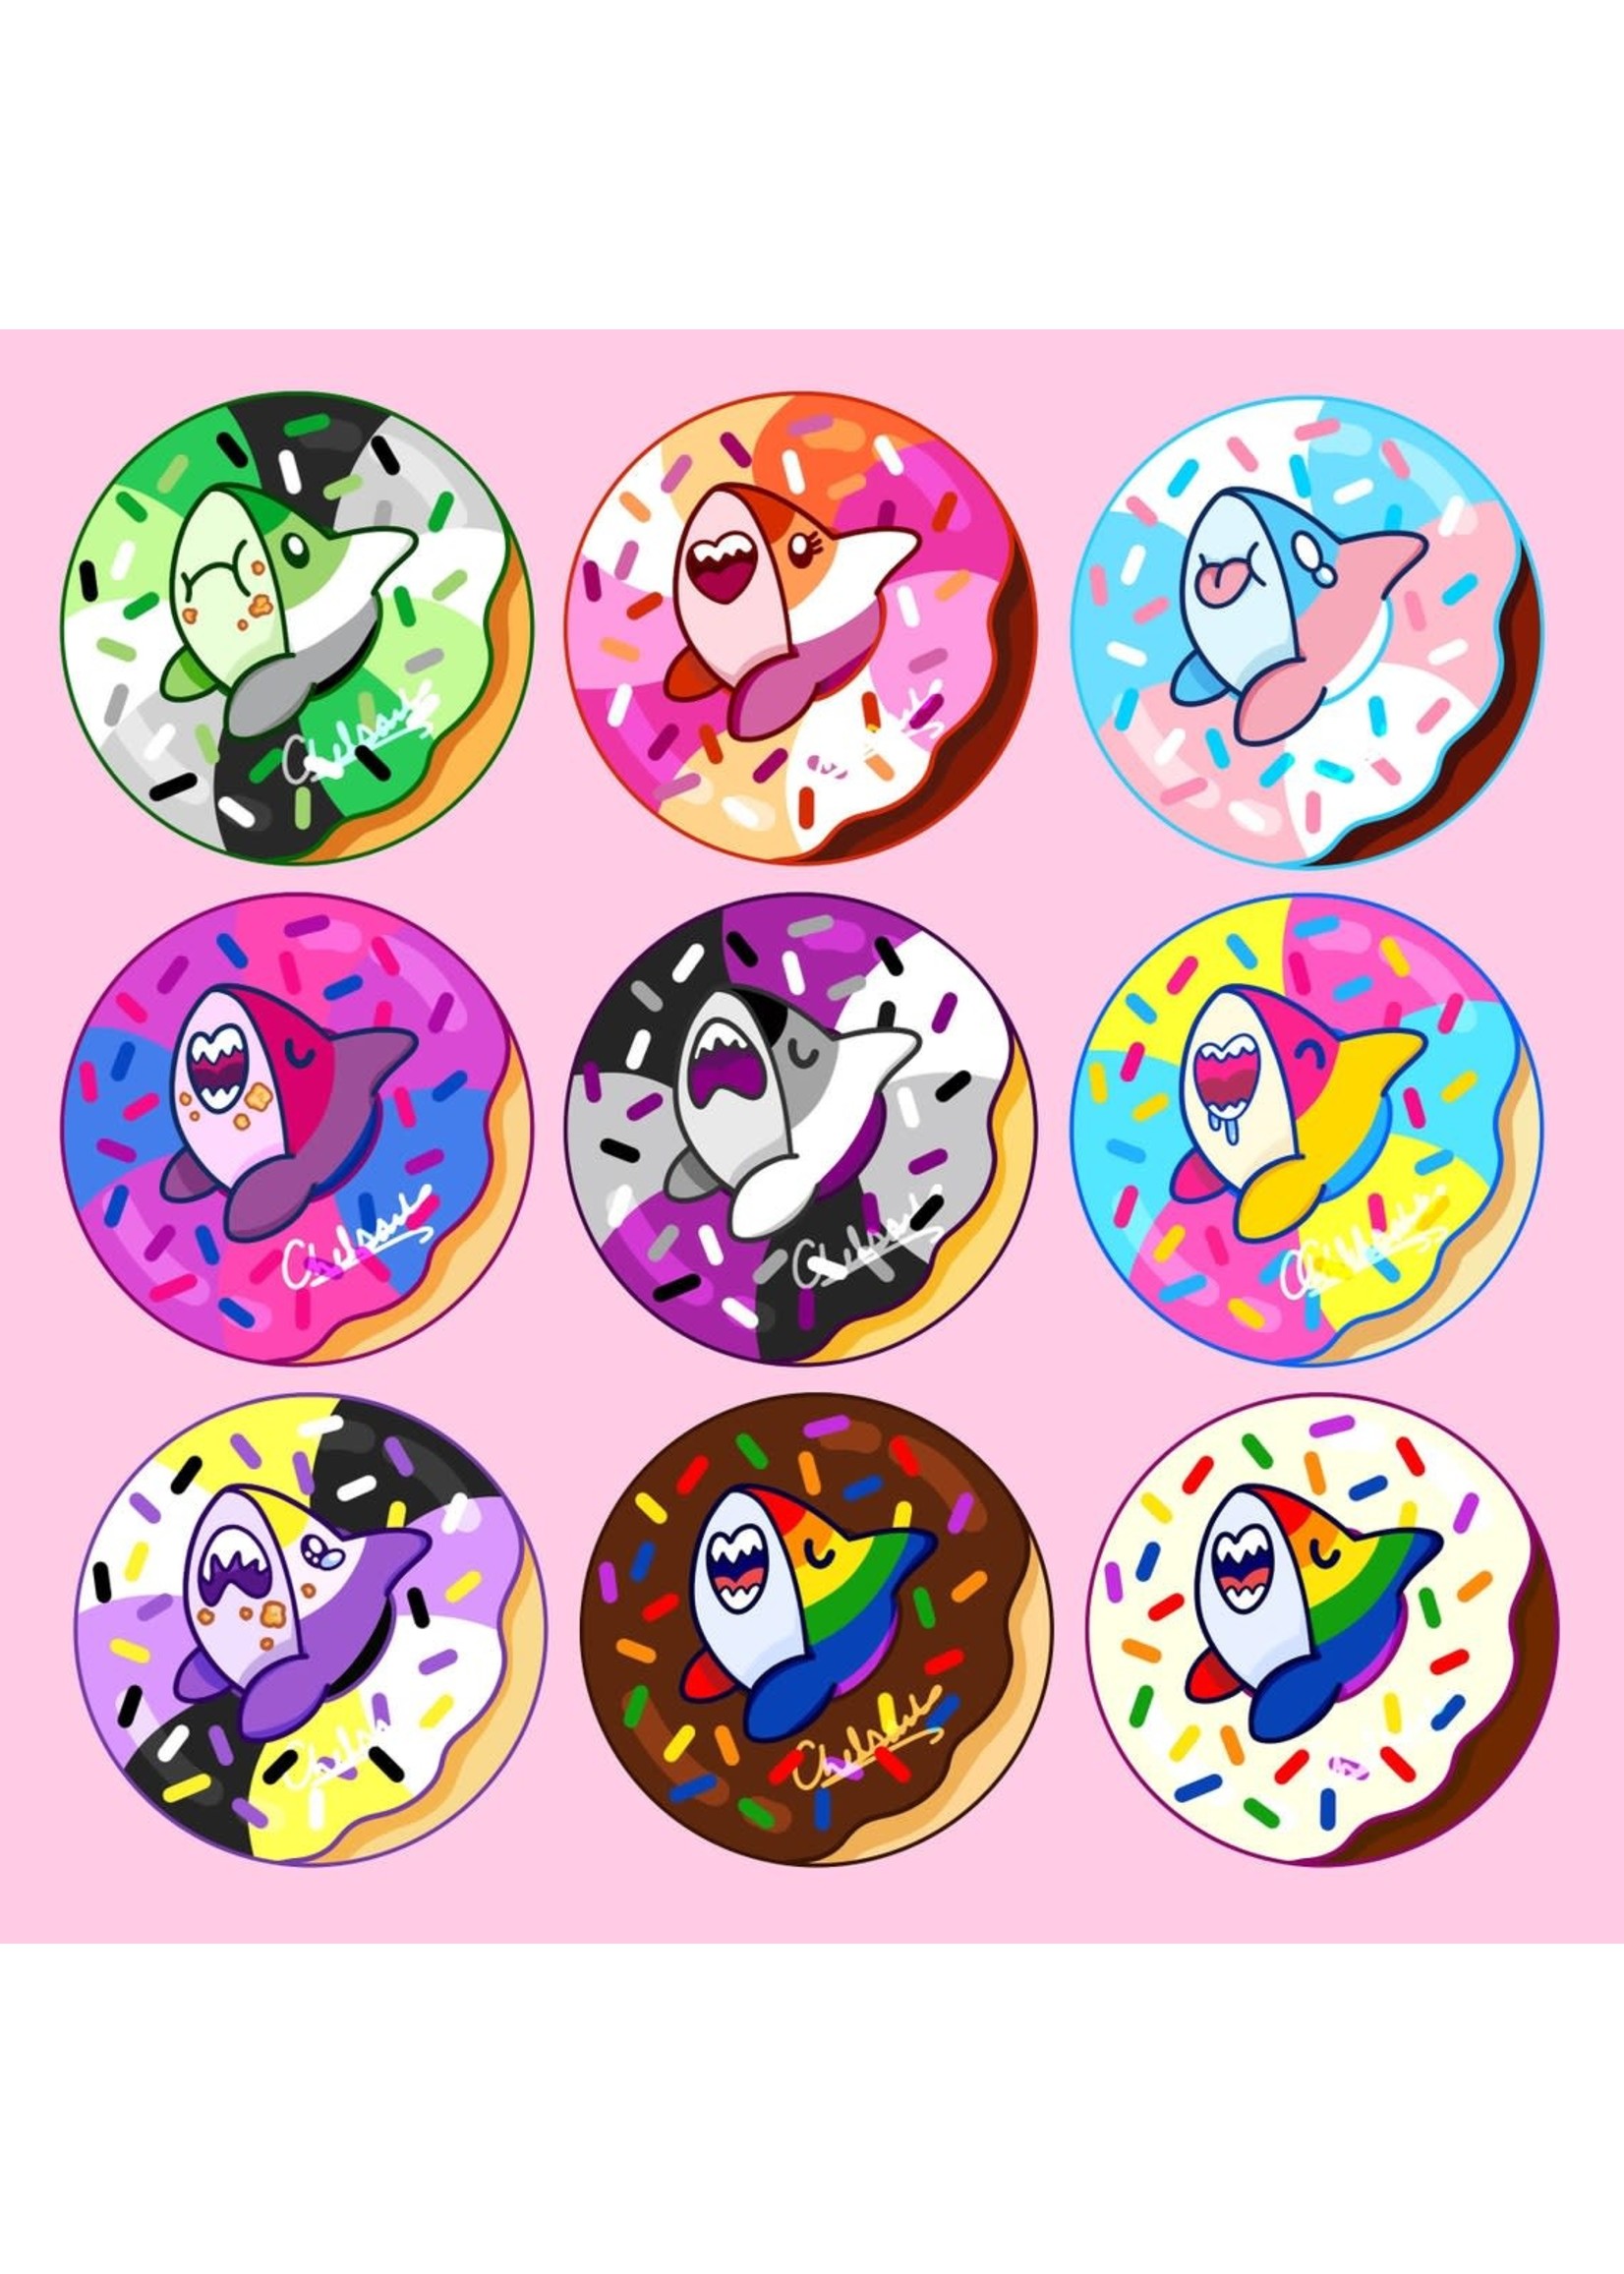 SHARKNDONUTS Pride Sharks and Donut Buttons Non-binary